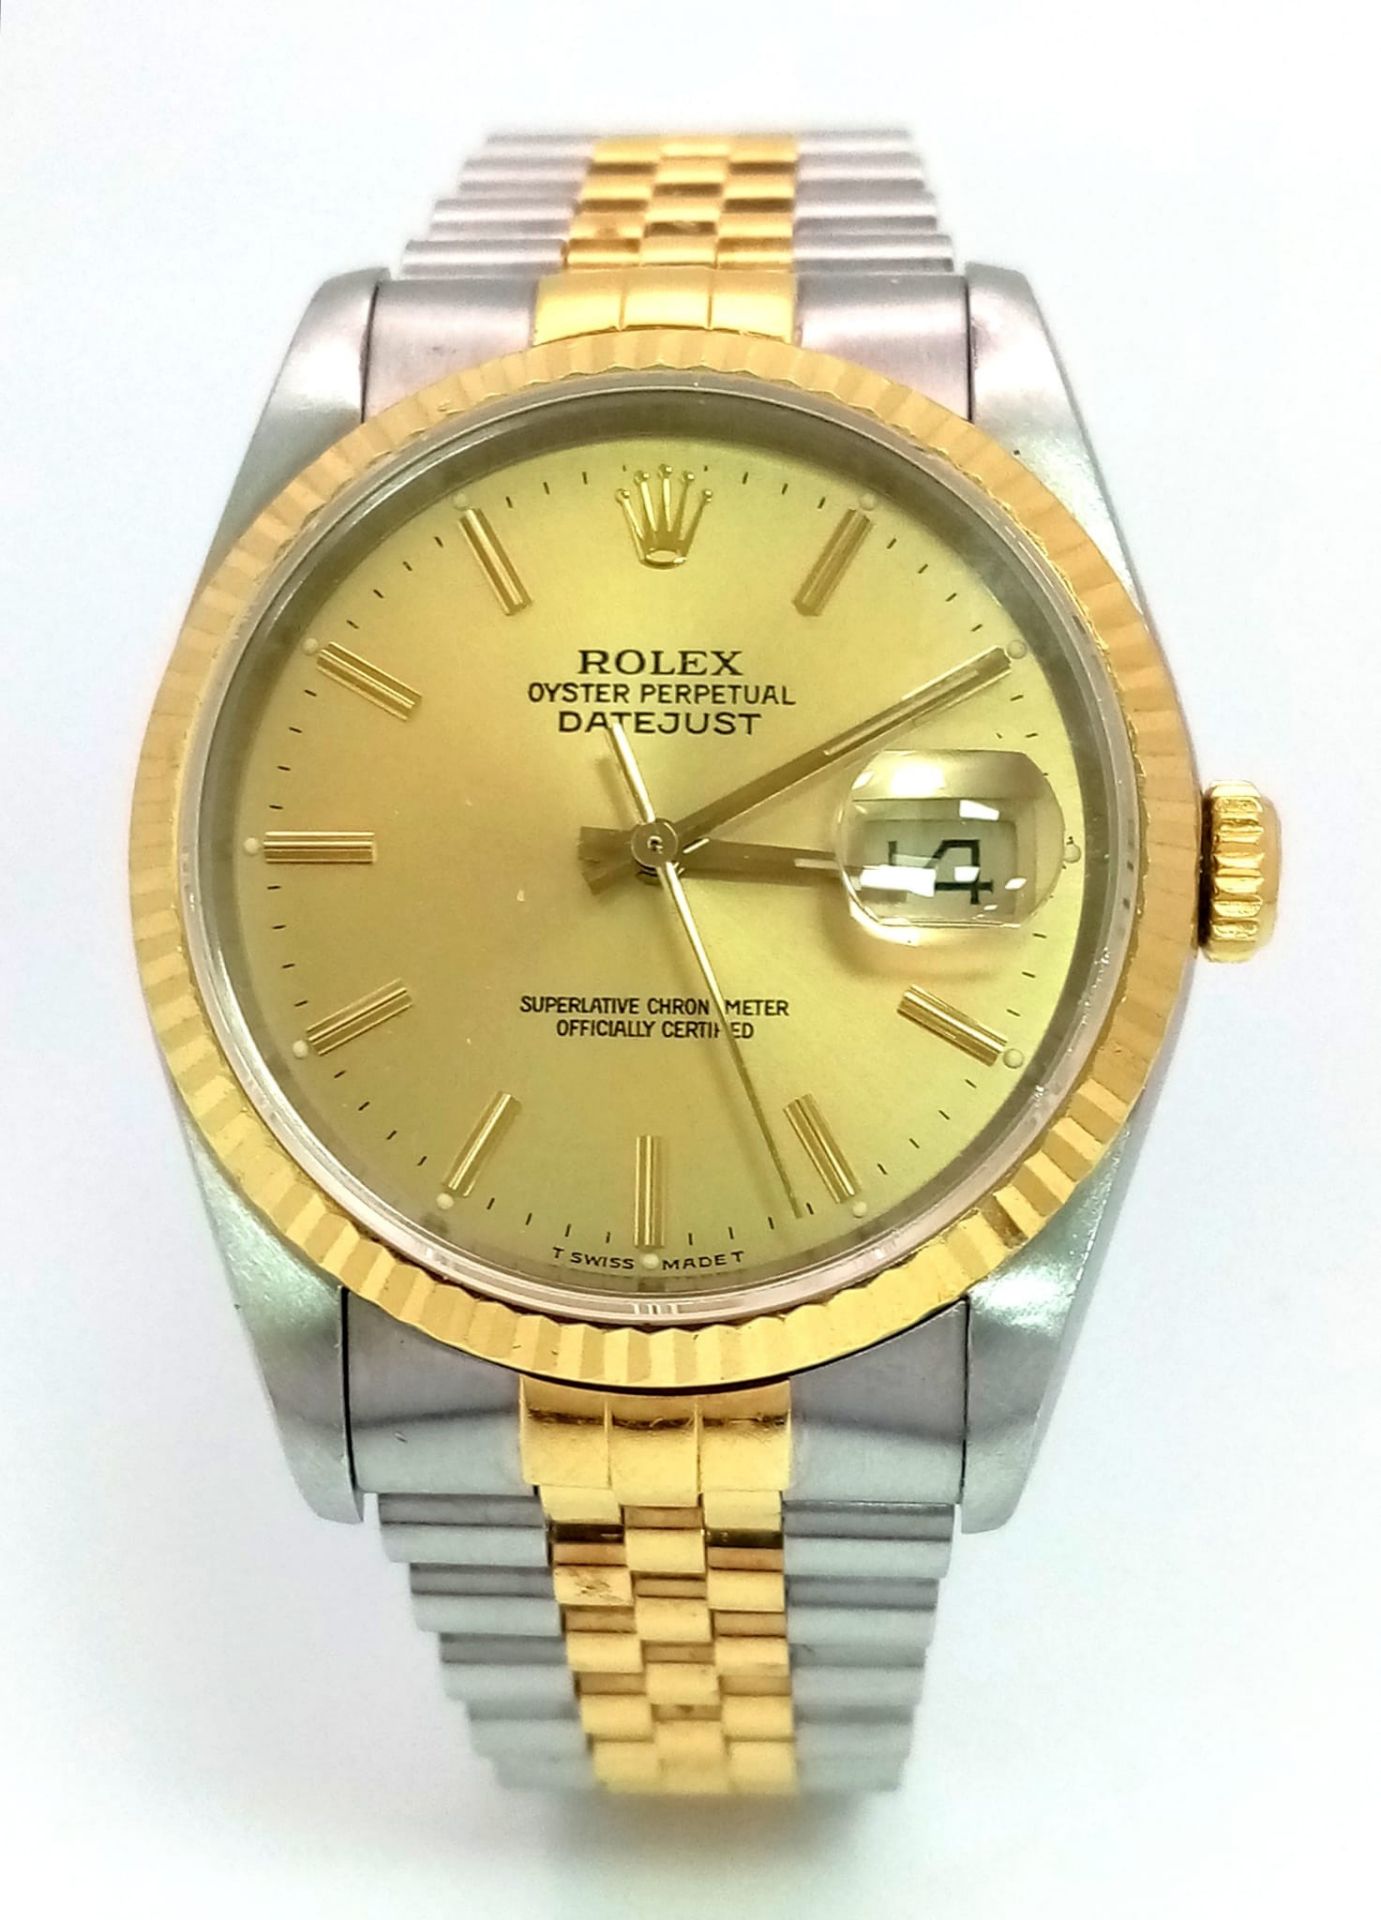 A Rolex Oyster Perpetual Datejust Gents Watch. Bi-metal strap and case - 36mm. Gold tone dial.